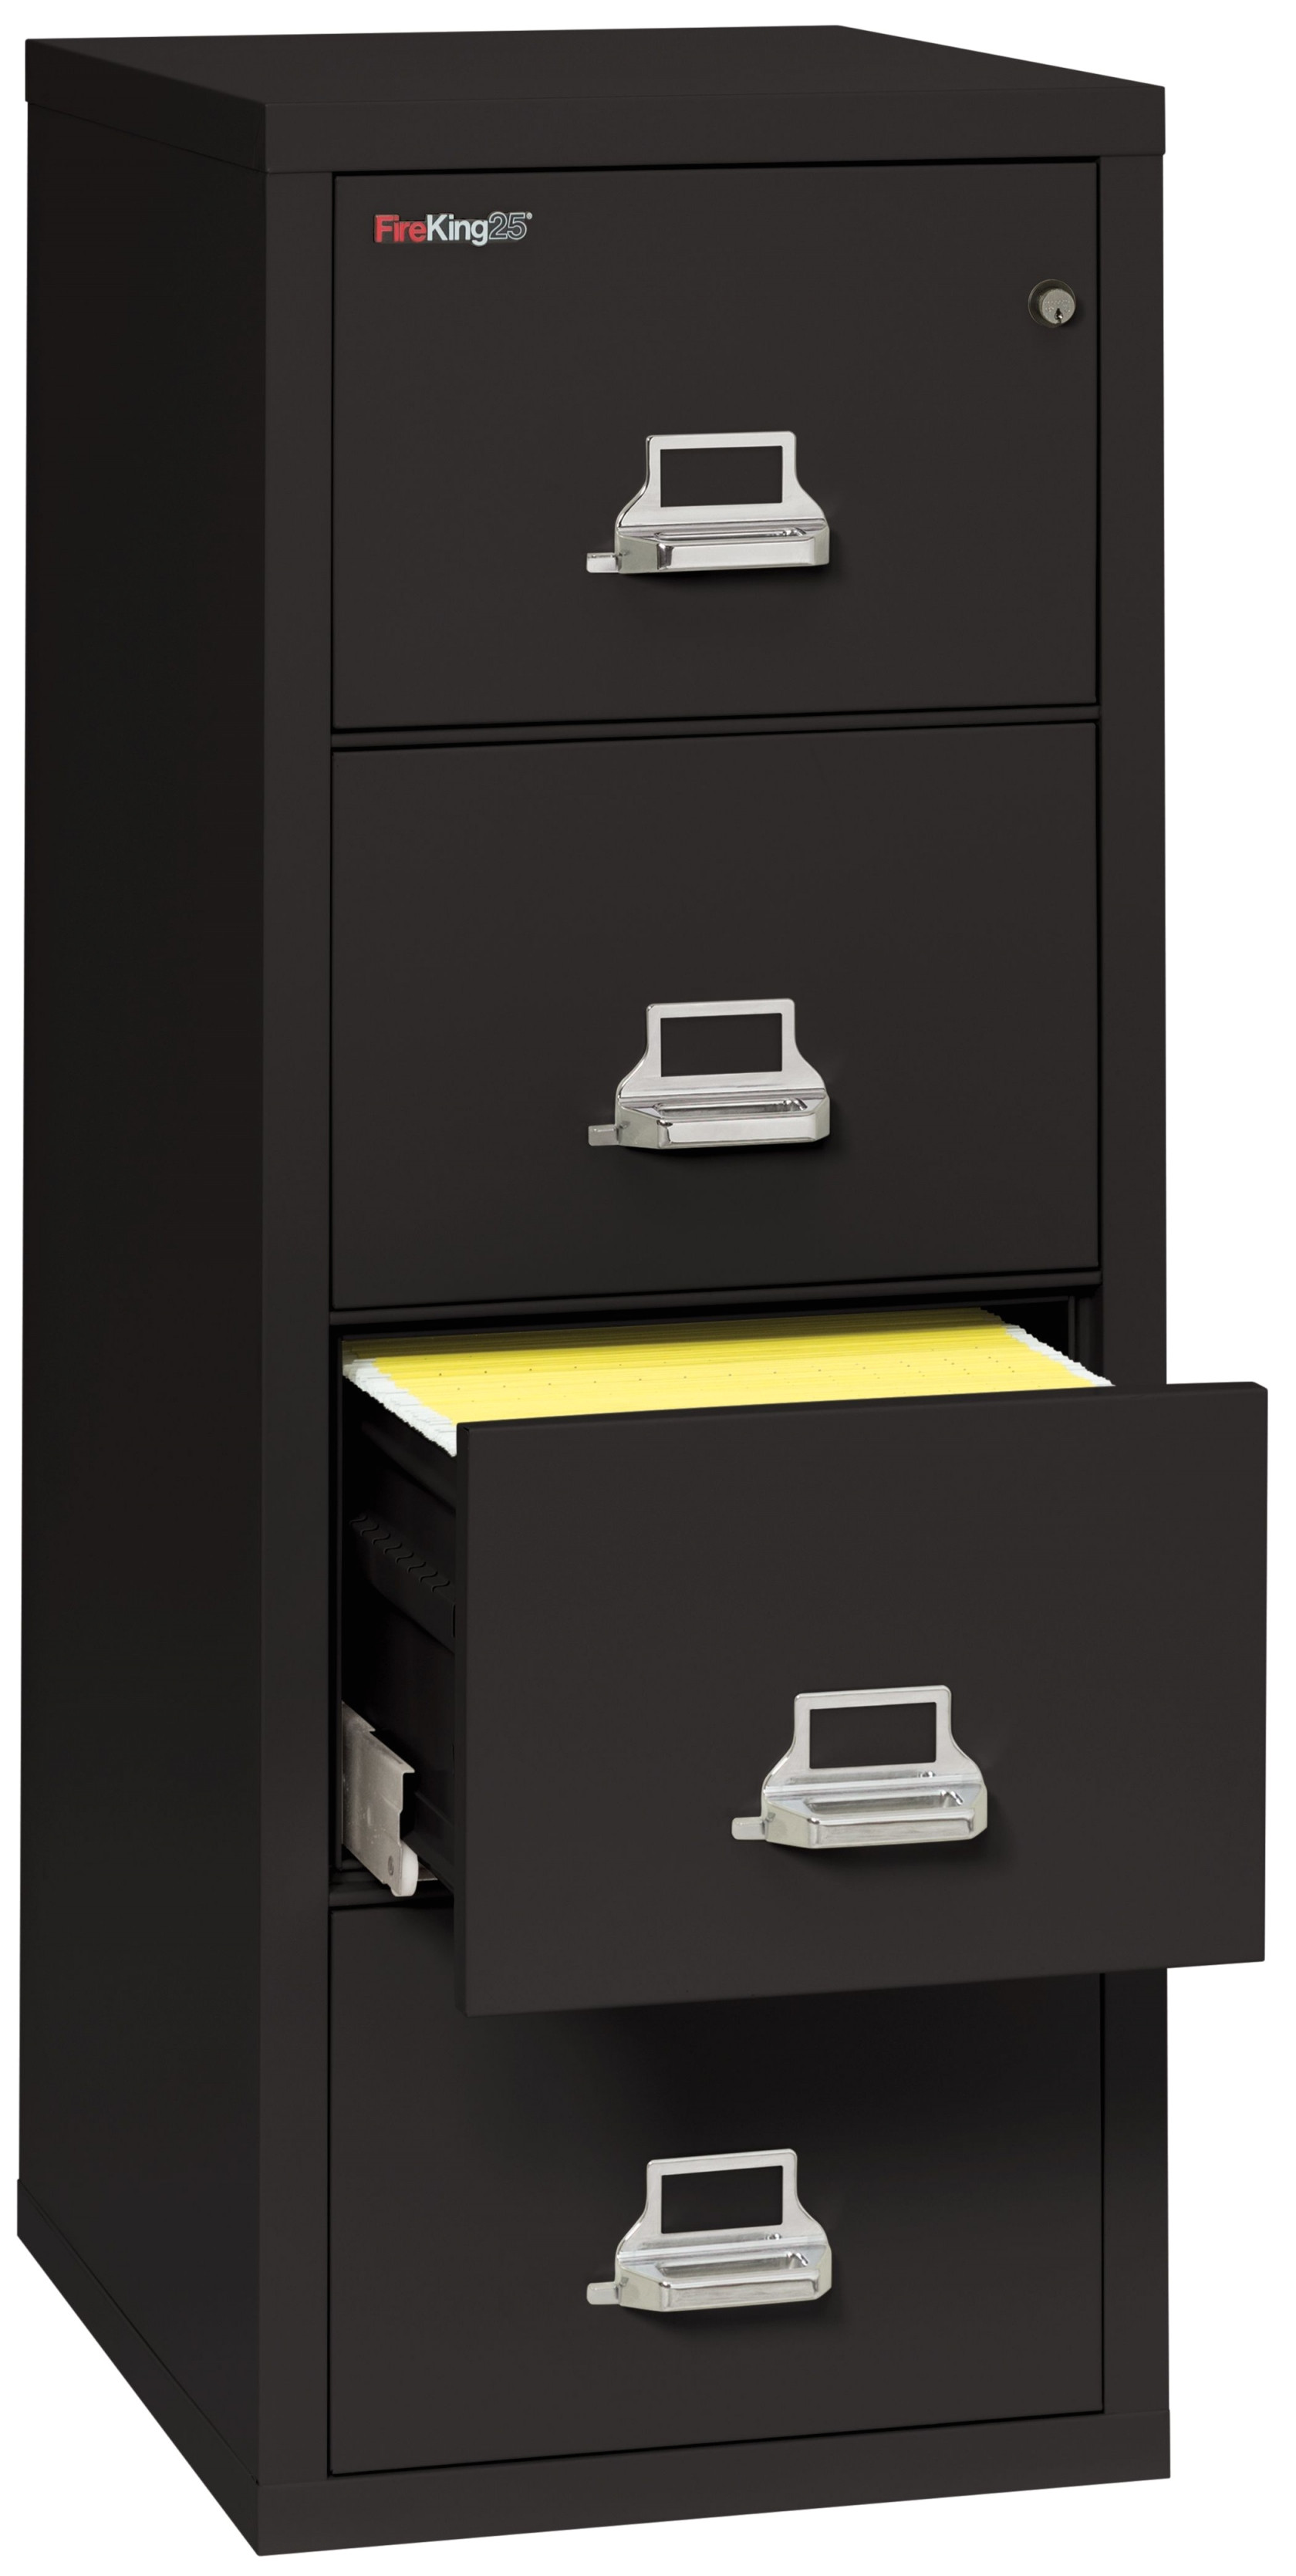 image of fire king file cabinets lost keys